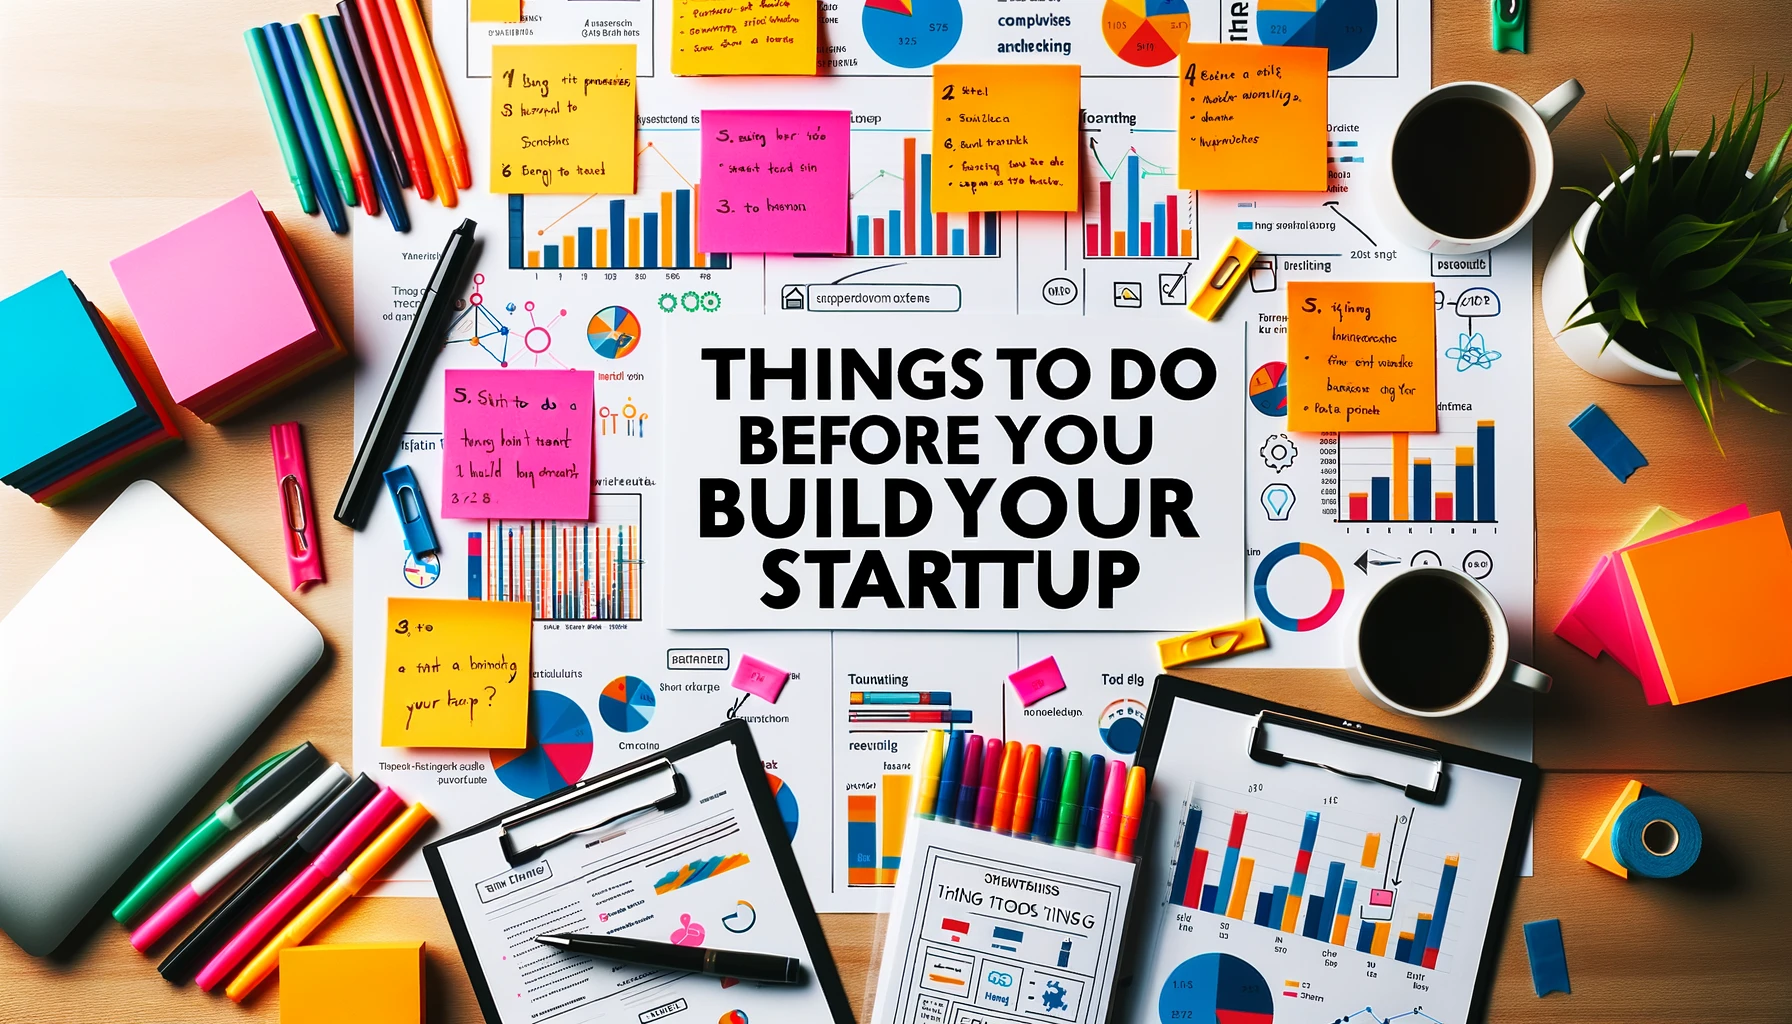 Things to do before you build your startup